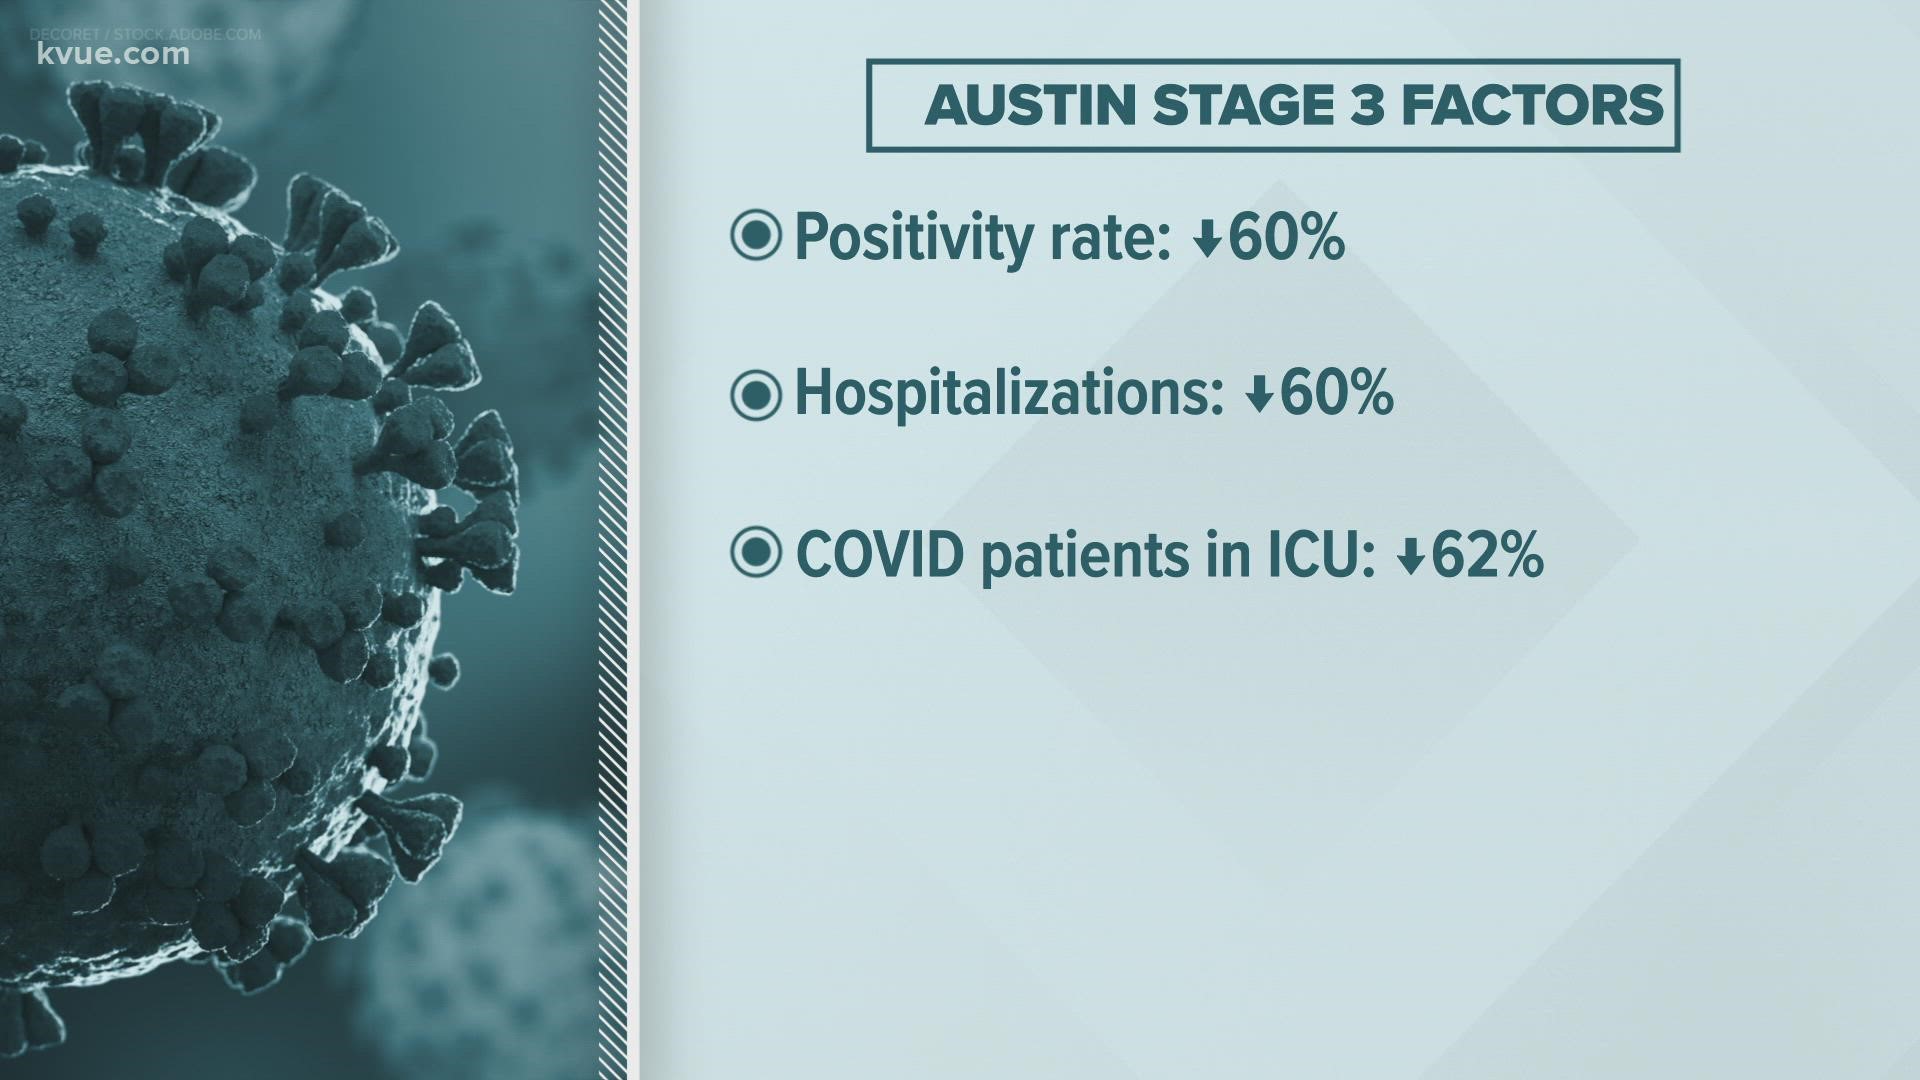 There's promising news in the battle against COVID-19 in Austin and Travis County.